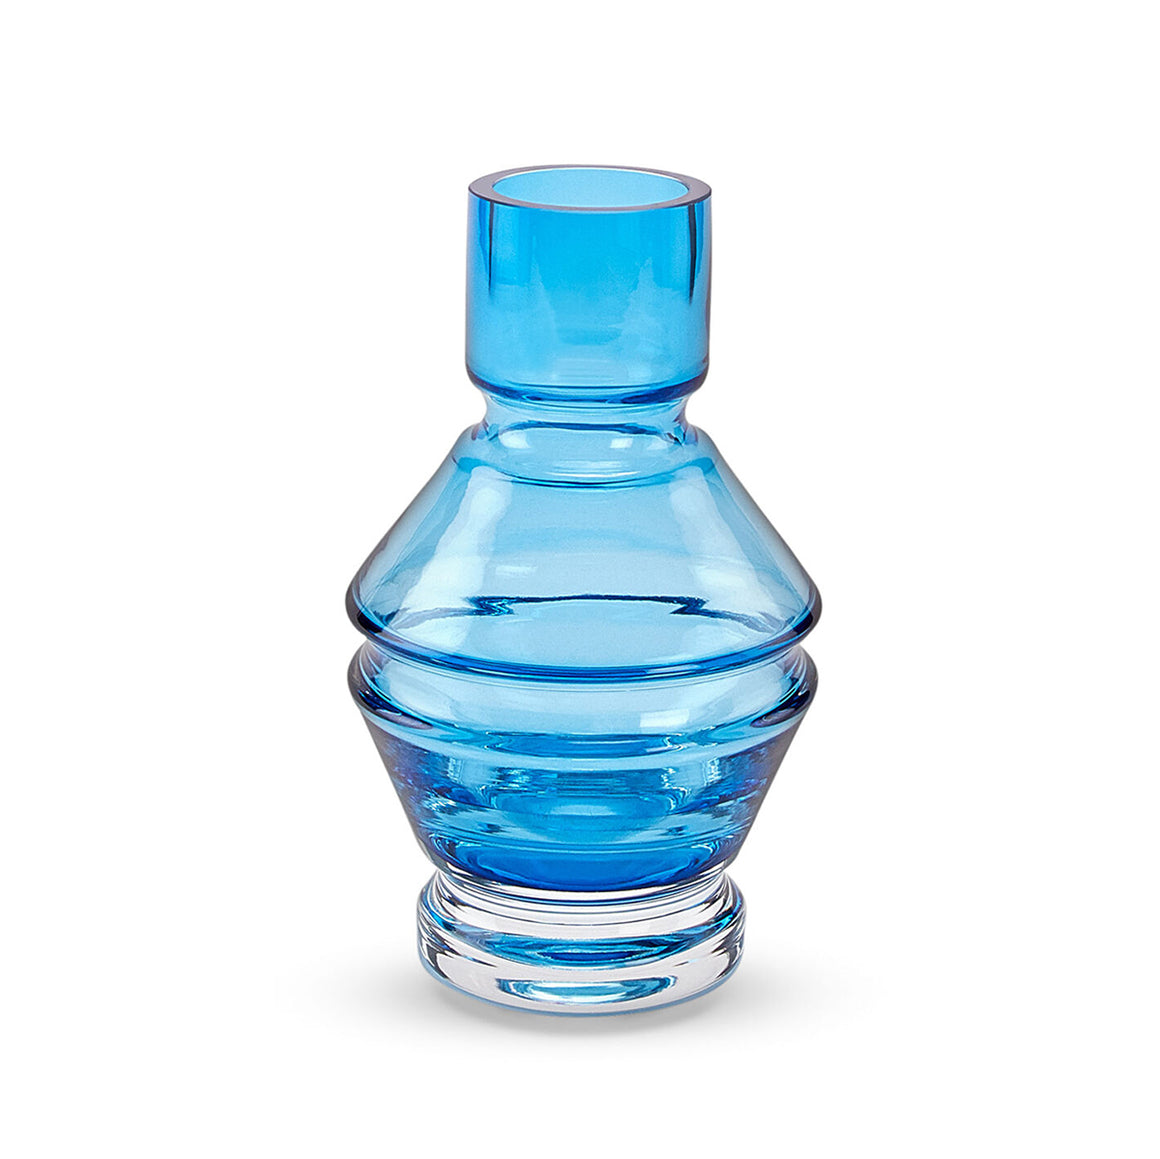 A structural and ridged glass vase in a aquamarine blue tone